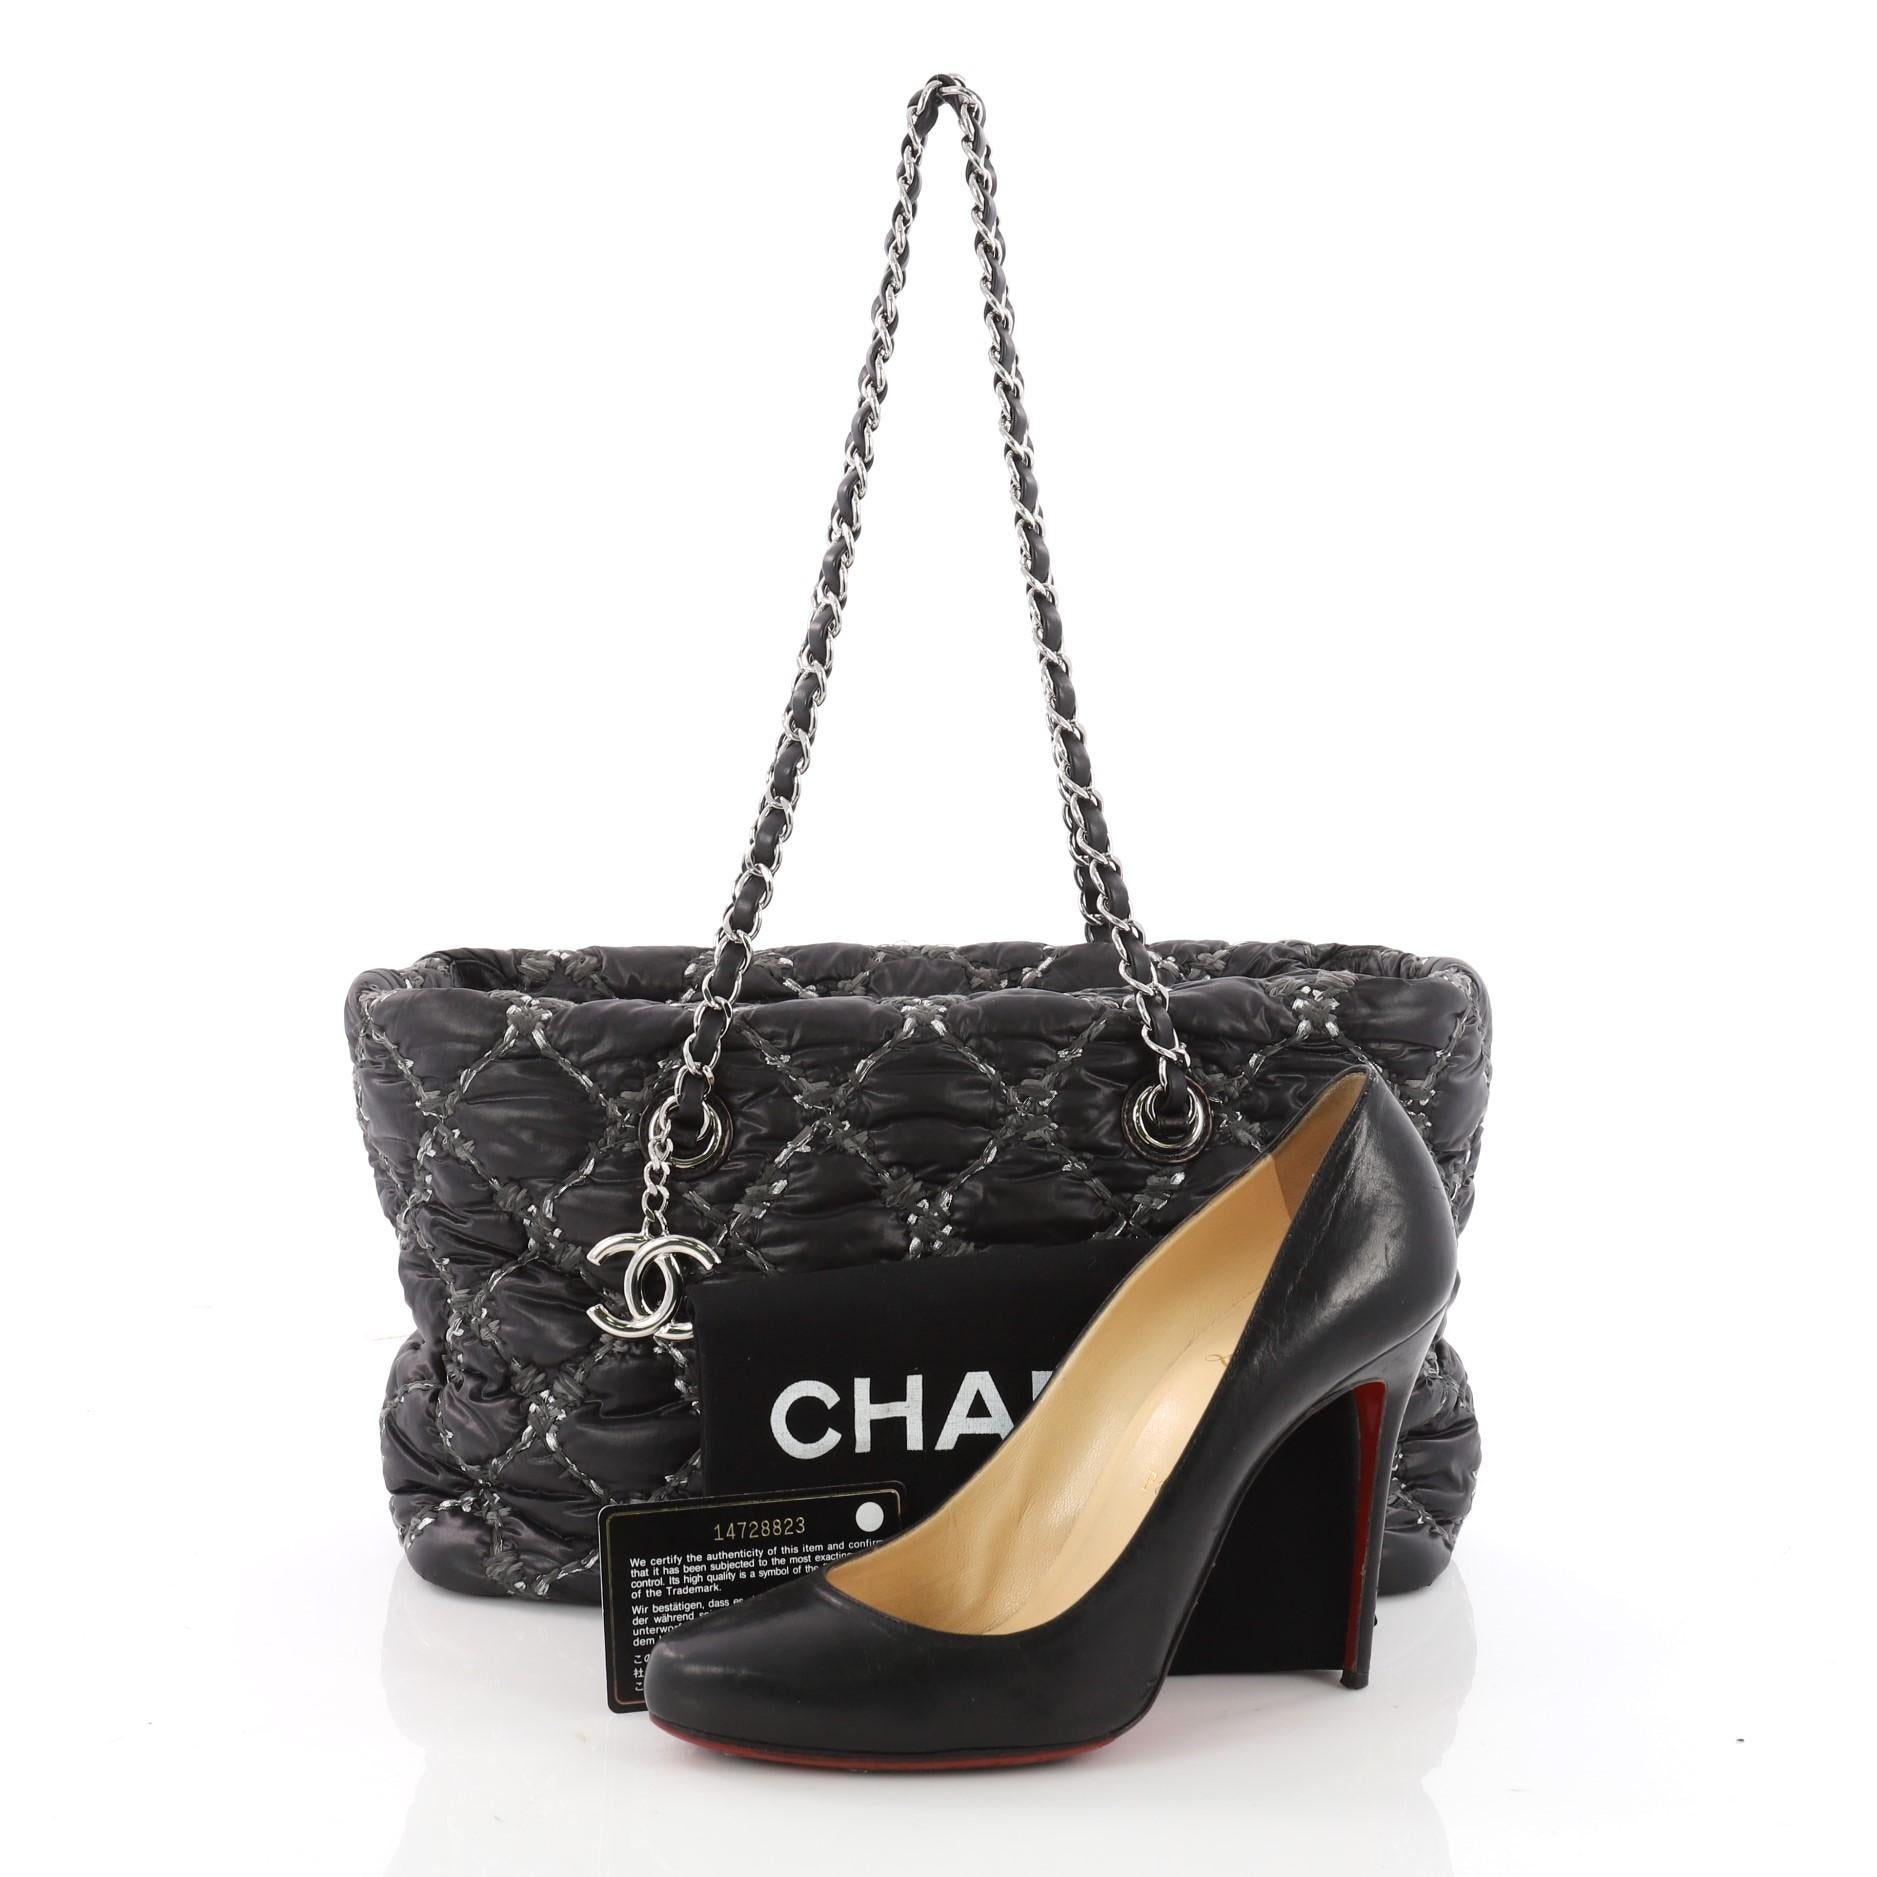 This authentic Chanel Tweed on Stitch Zip Tote Quilted Nylon Small is stylish and unique for the modern woman. Crafted from black nylon in Chanel's trademark diamond quilting with quilted tweed, this adorable bag features dual woven-in leather chain